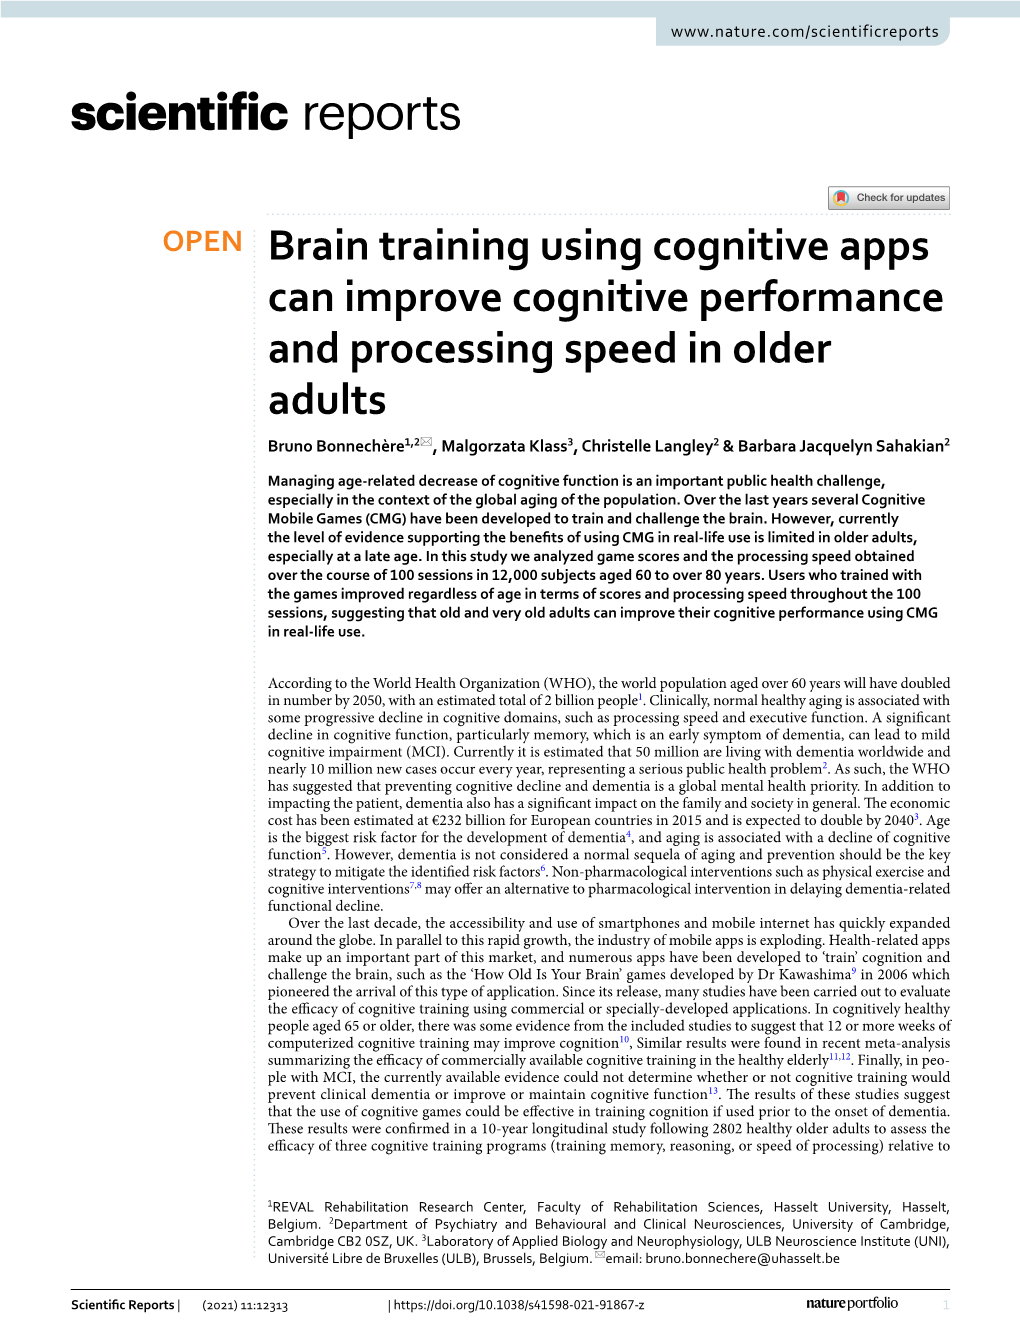 Brain Training Using Cognitive Apps Can Improve Cognitive Performance